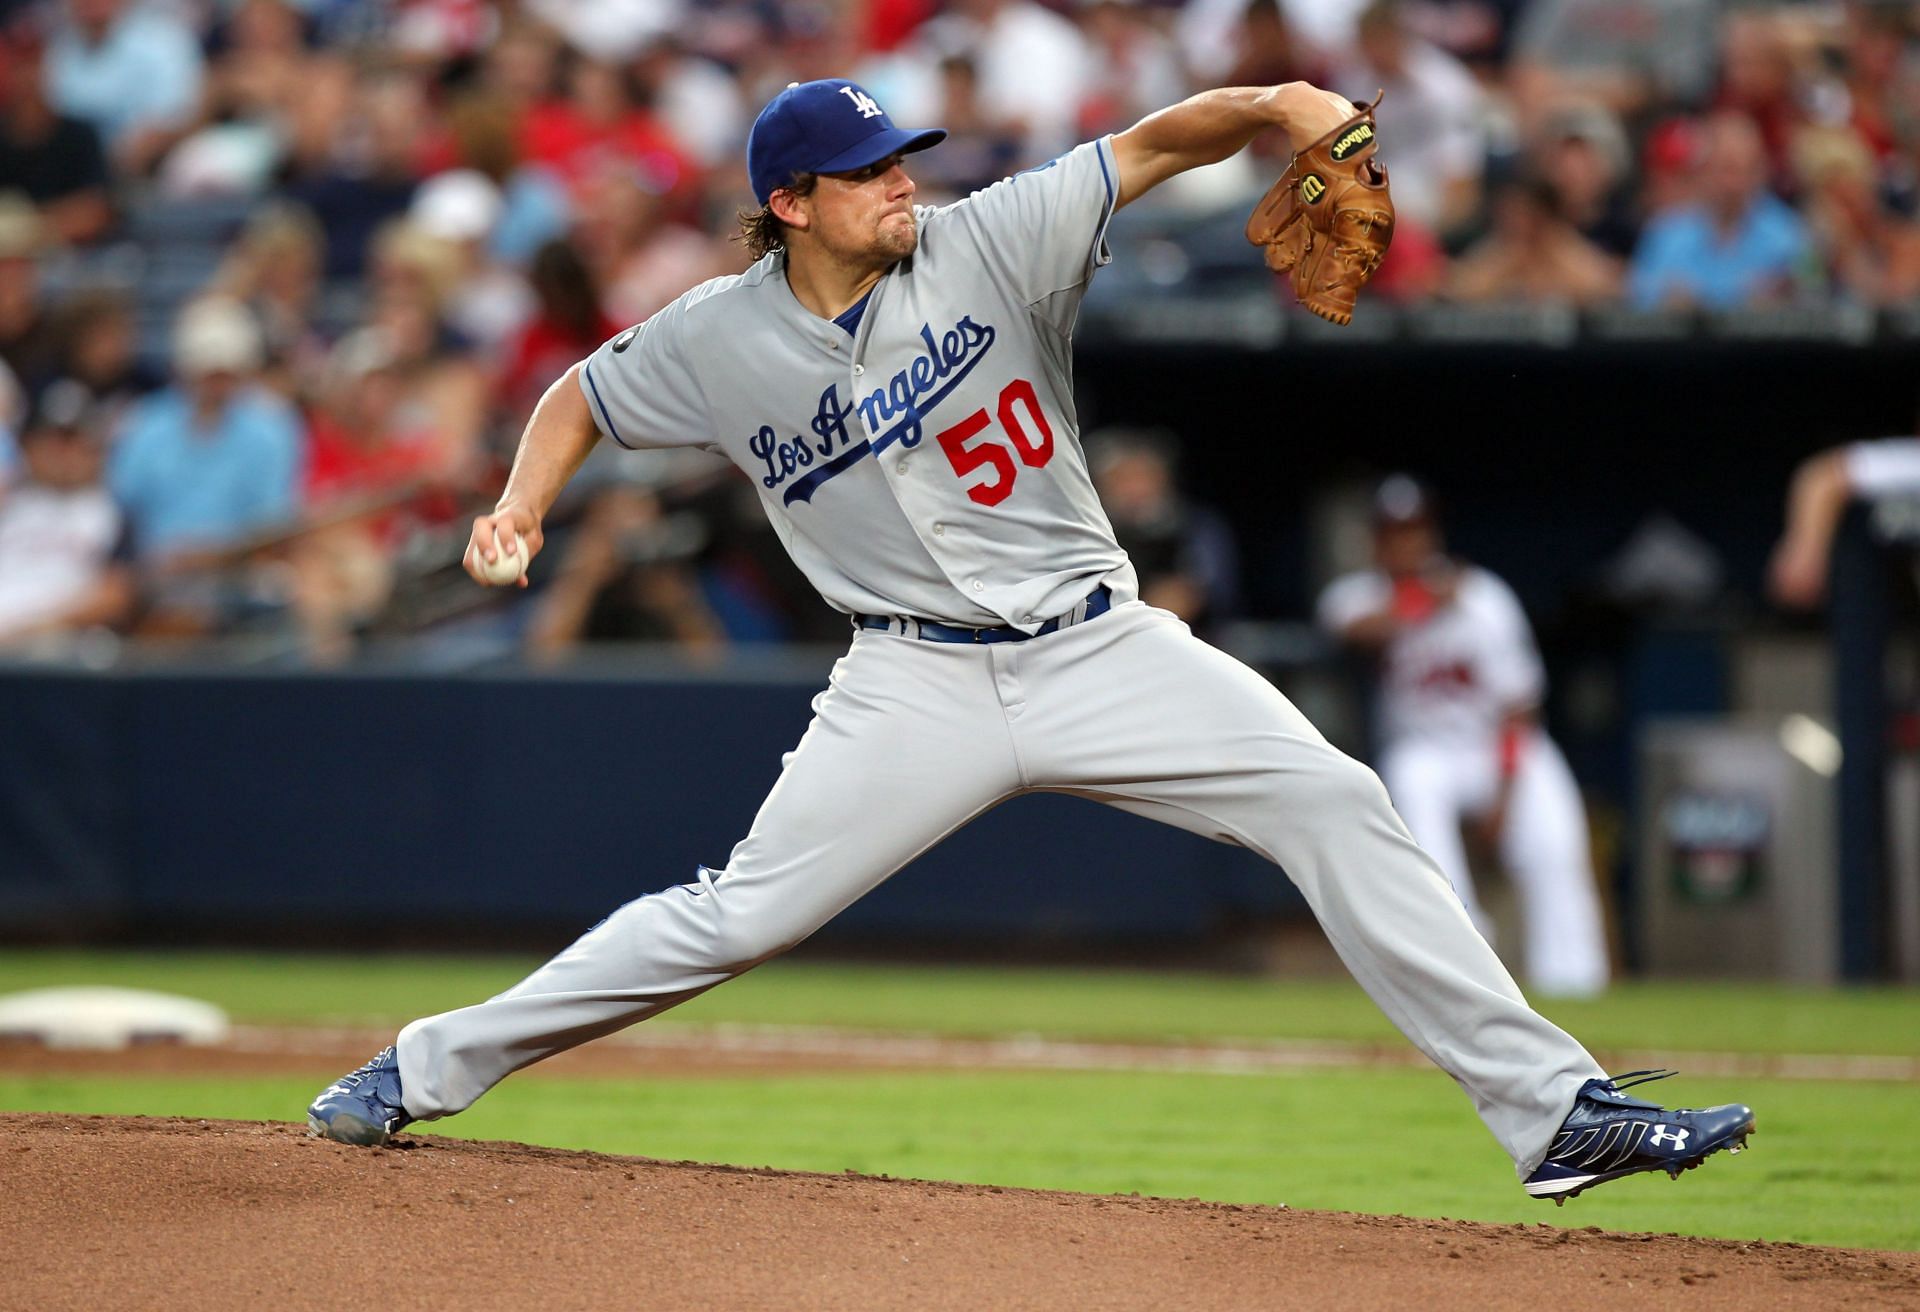 Nathan Eovaldi of the Los Angeles Dodgers pitches against the Atlanta Braves.